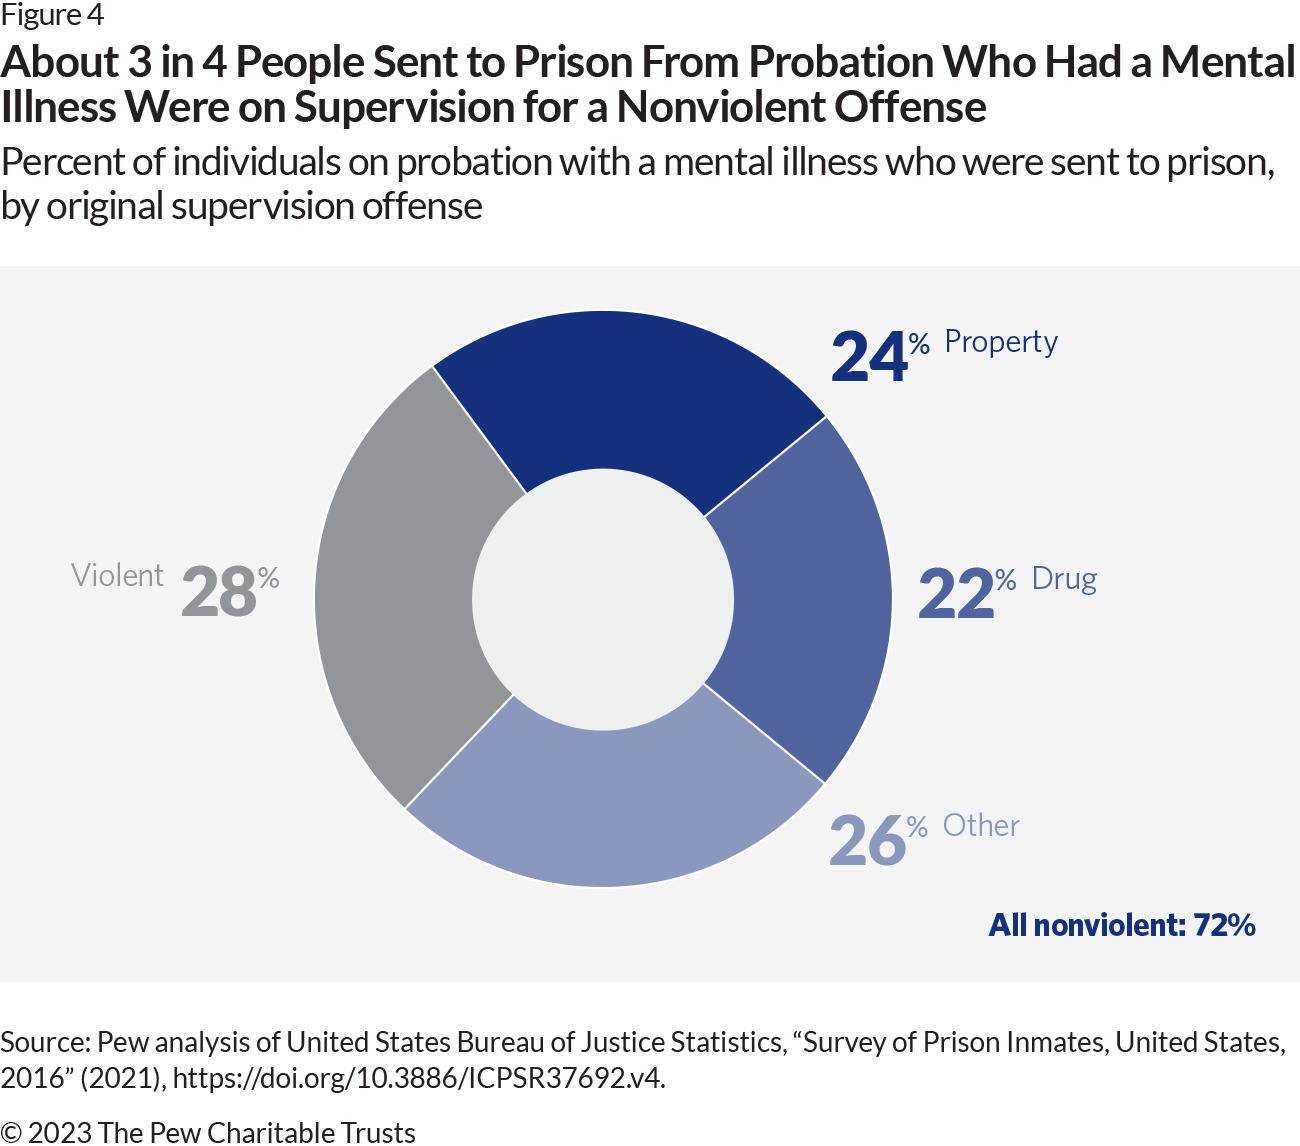 Pie chart showing the share of people on probation with a mental illness who were sent to prison by original offense type. The pie chart is made of four categories: property offenses, which make up 24% of all cases; drug offenses (22%); other offenses (26%); and violent offenses (28%). Nonviolent offenses, relative to violent offenses, make up the largest share of offenses among people on probation with a mental illness who were sent to prison (72%). The nonviolent offense categories are shown in various shades of orange, and the violent offense category is shown in blue.